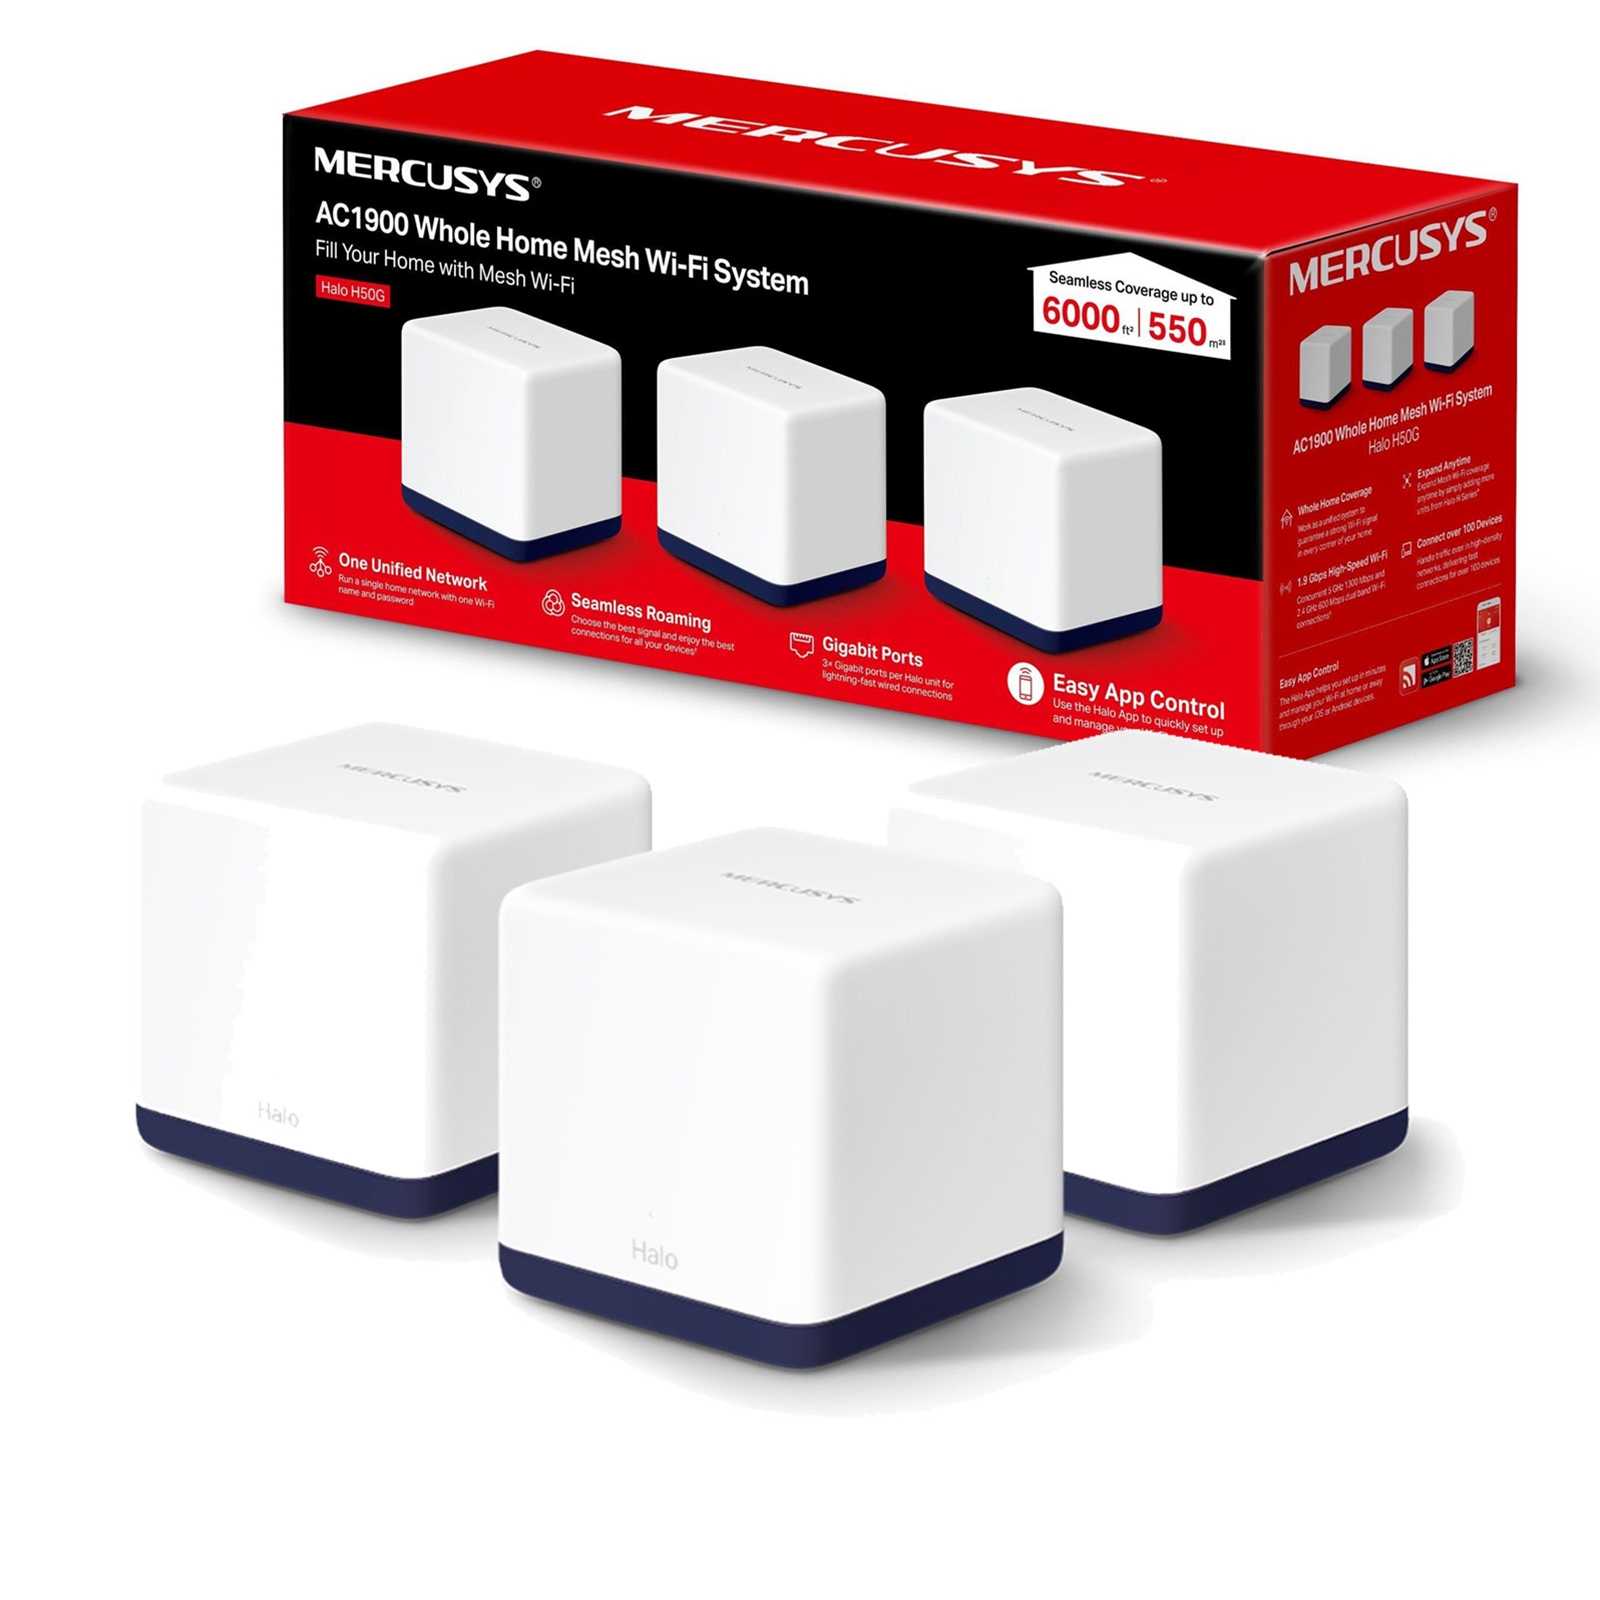 Mercusys Halo H50G (3-pack) AC1900 Whole Home Mesh Wi-Fi System, 600 Mbps at 2.4 GHz + 1300 Mbps at 5 GHz, 3x Internal Antennas, 3x Gigabit Ports per Unit, Halo App, One Unified Network, Seamless Roaming